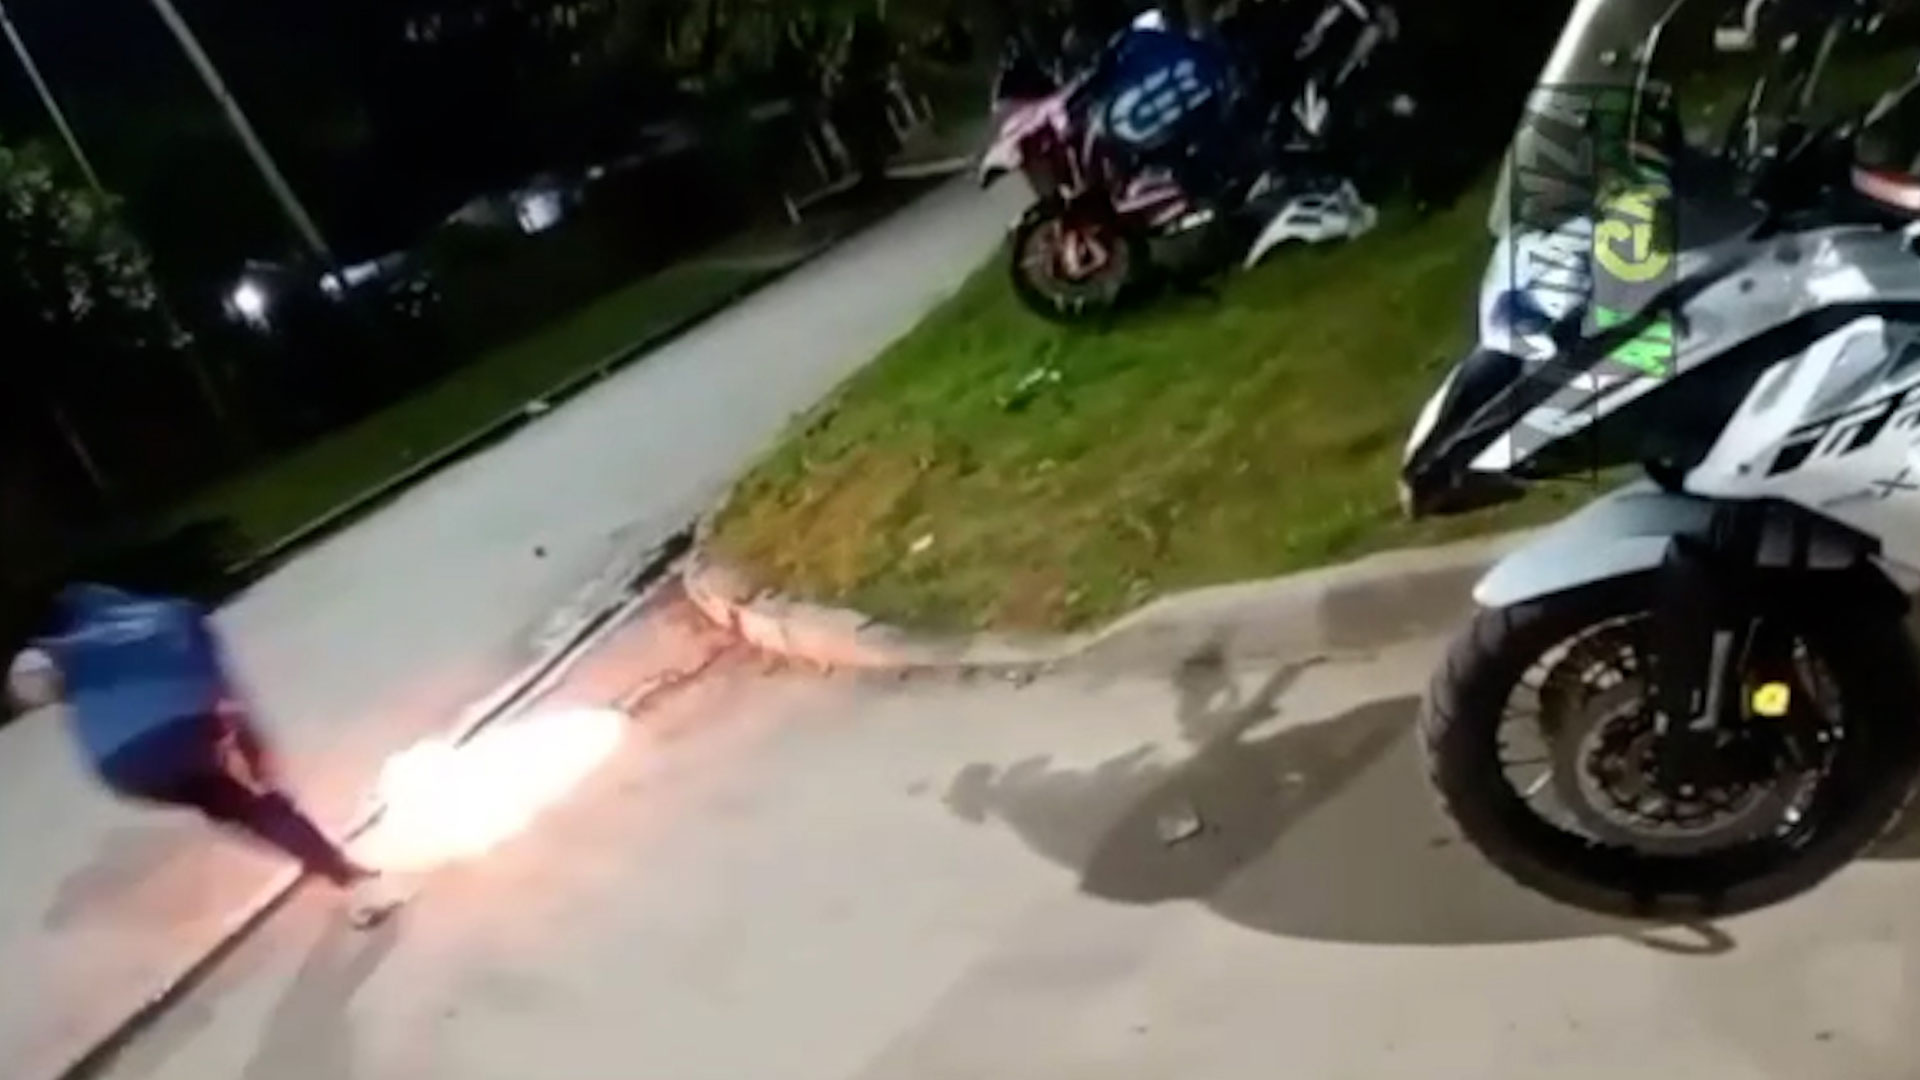 Because they can't keep them for long, criminals burn many of the stolen high-end motorcycles